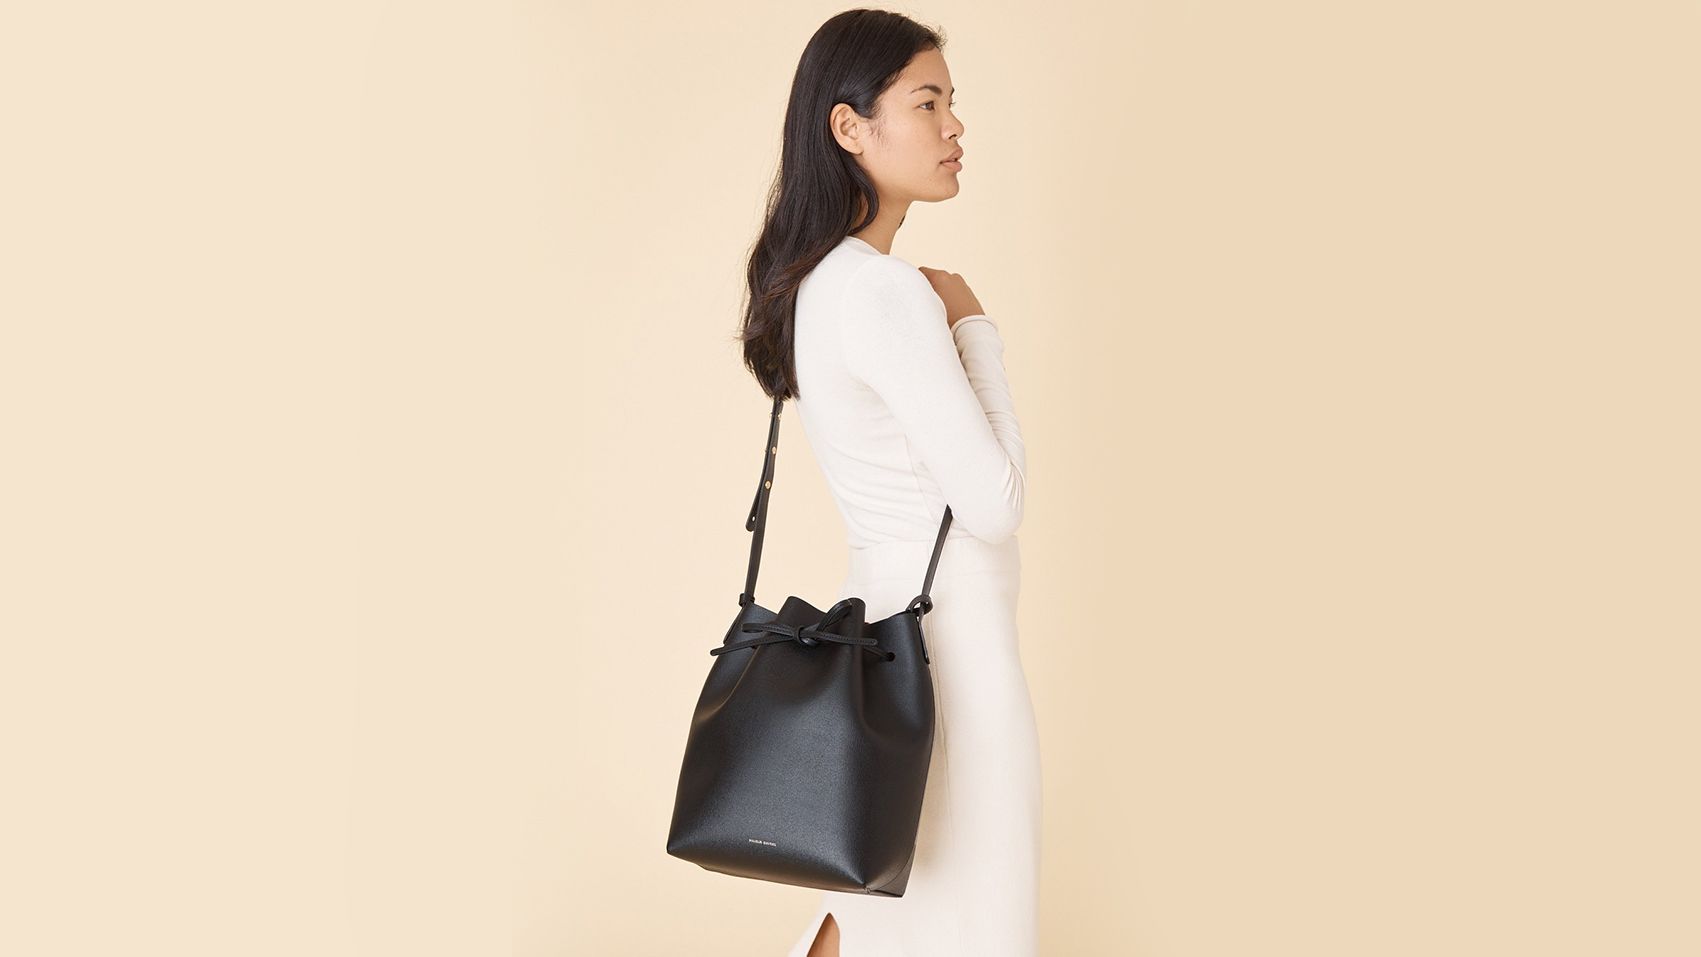 9 Designer Handbags That Are Totally Worth The Investment - NotJessFashion